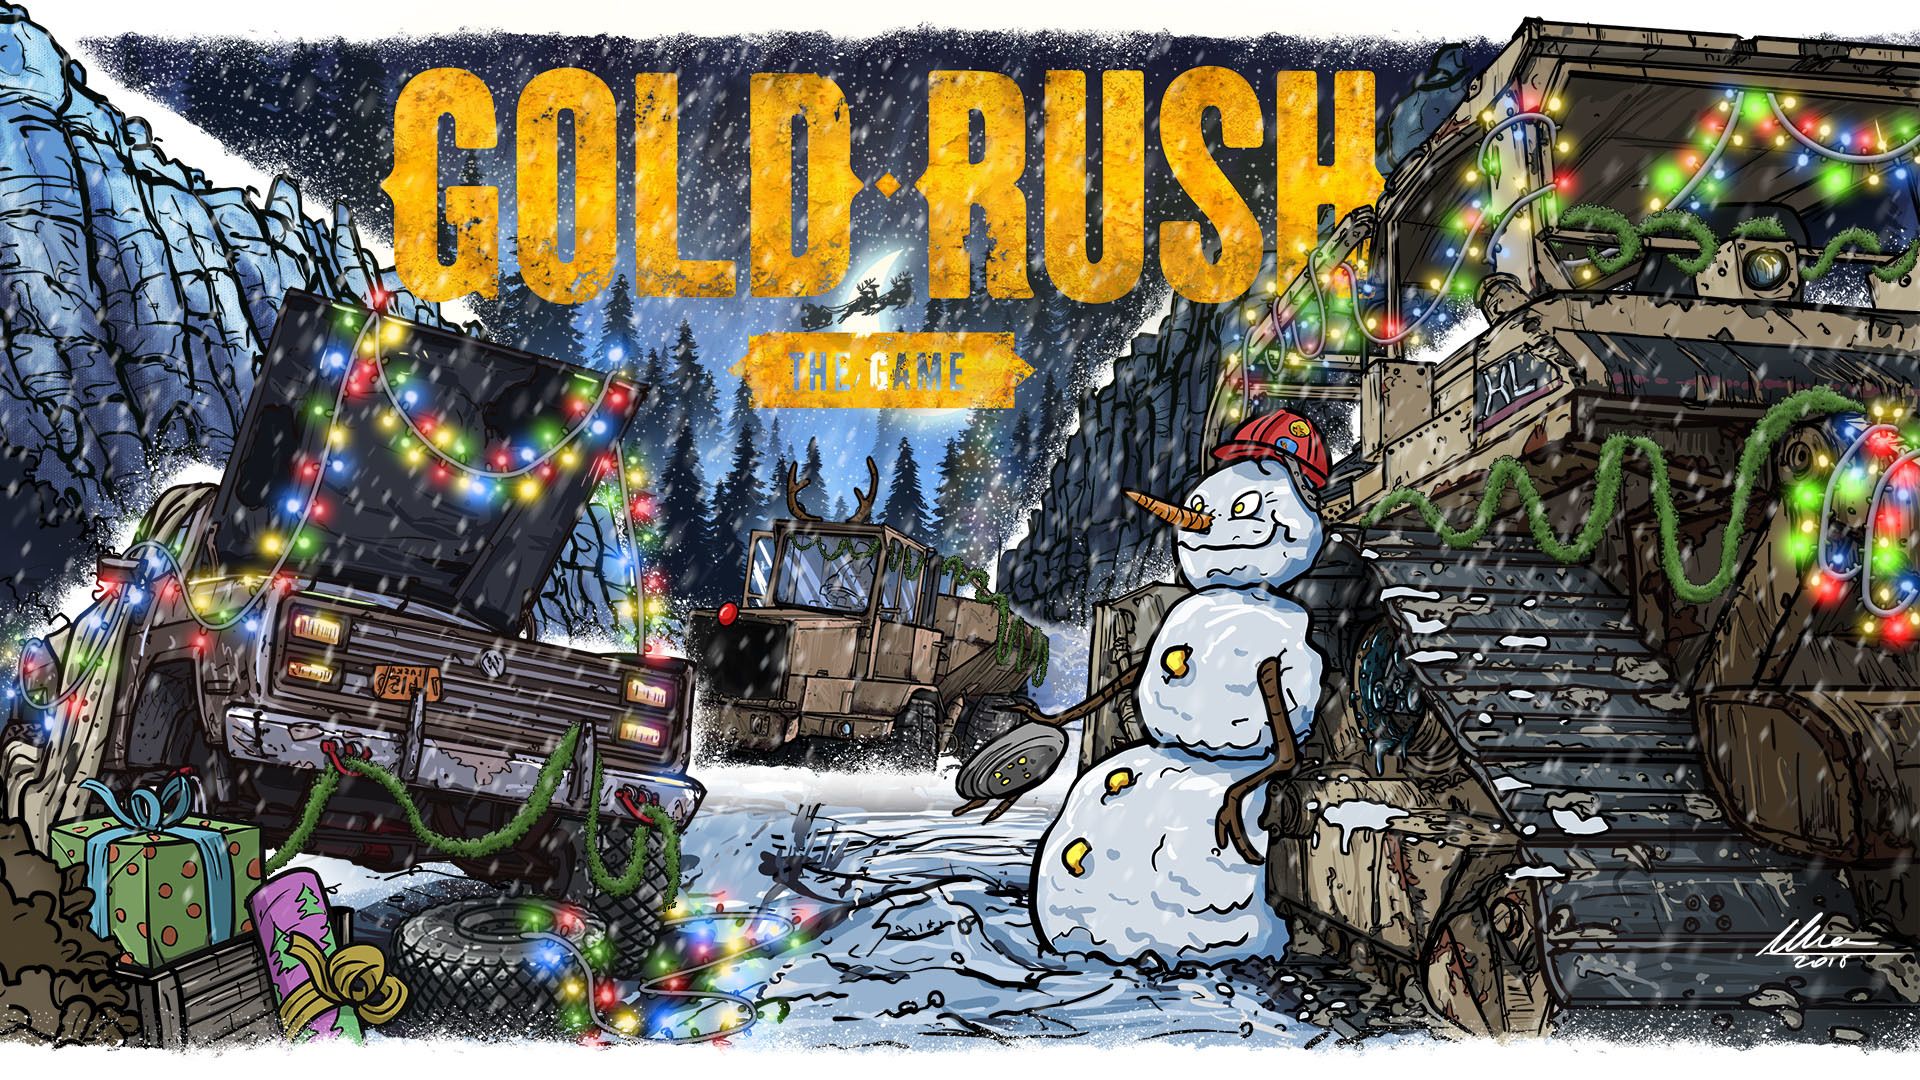 Steam - Gold Rush: The Game - Update 1.5.1 is LIVE